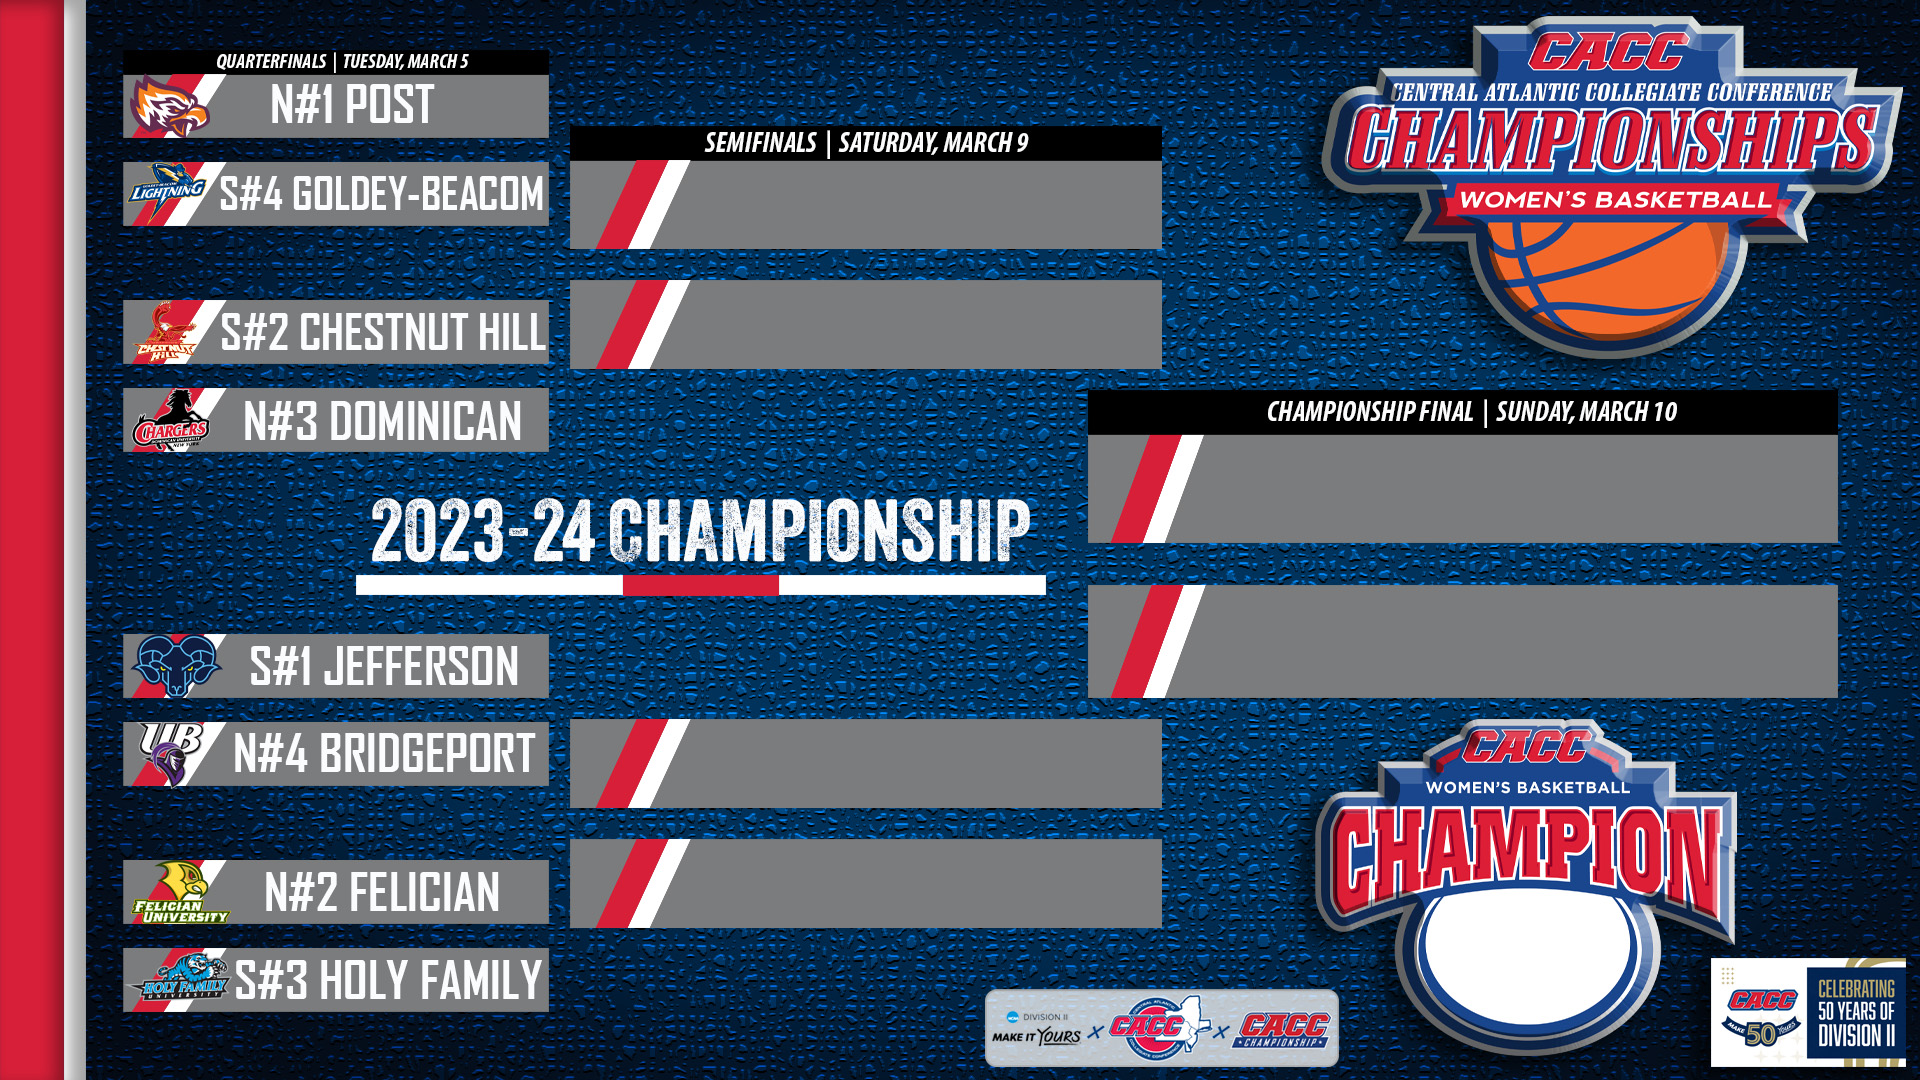 2023-24 CACC MEN'S BASKETBALL CHAMPIONSHIP CENTRAL